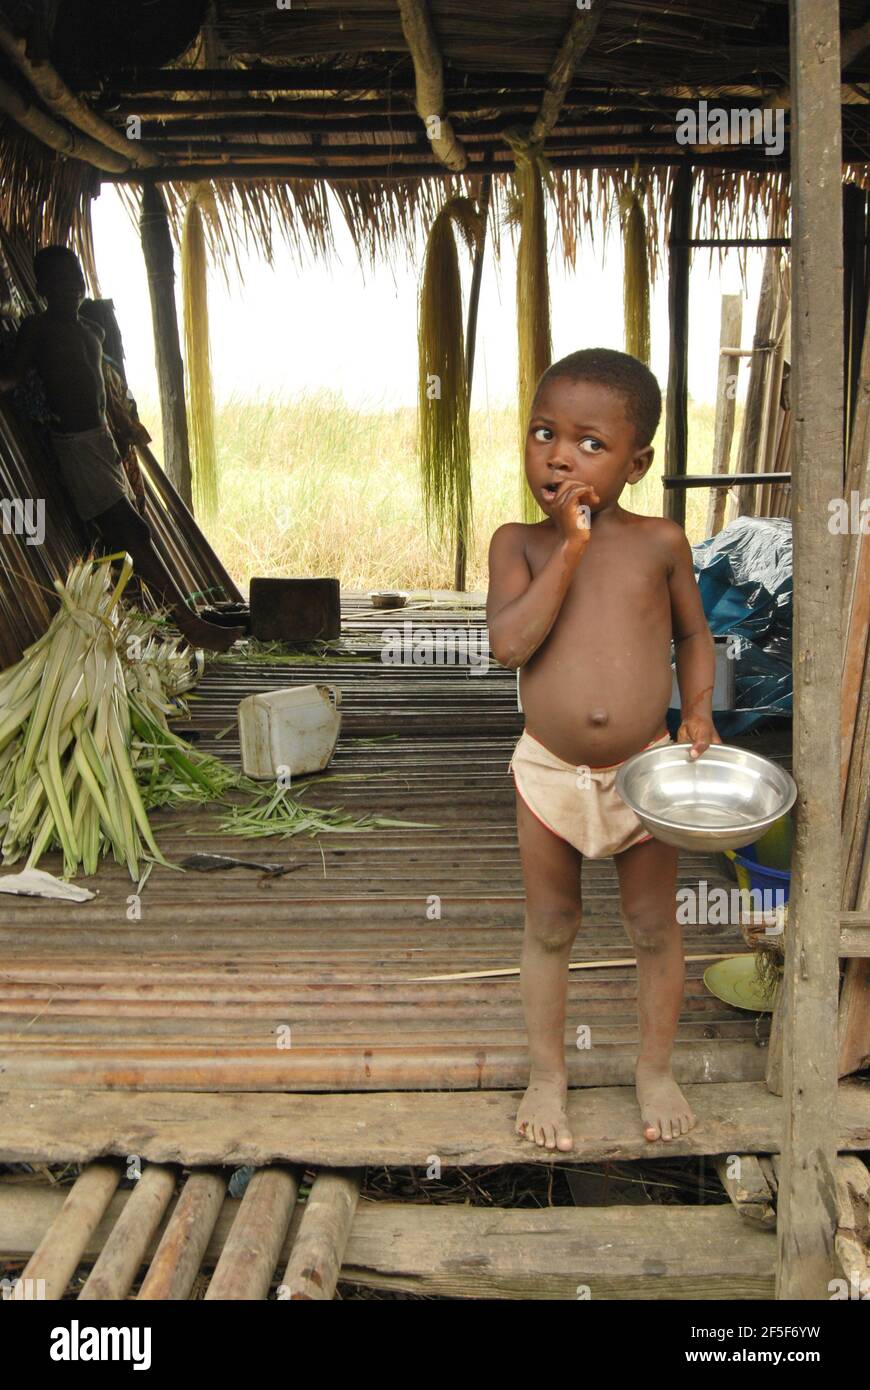 A boy standing in front of a house in Ondo State, Nigeria. Stock Photo